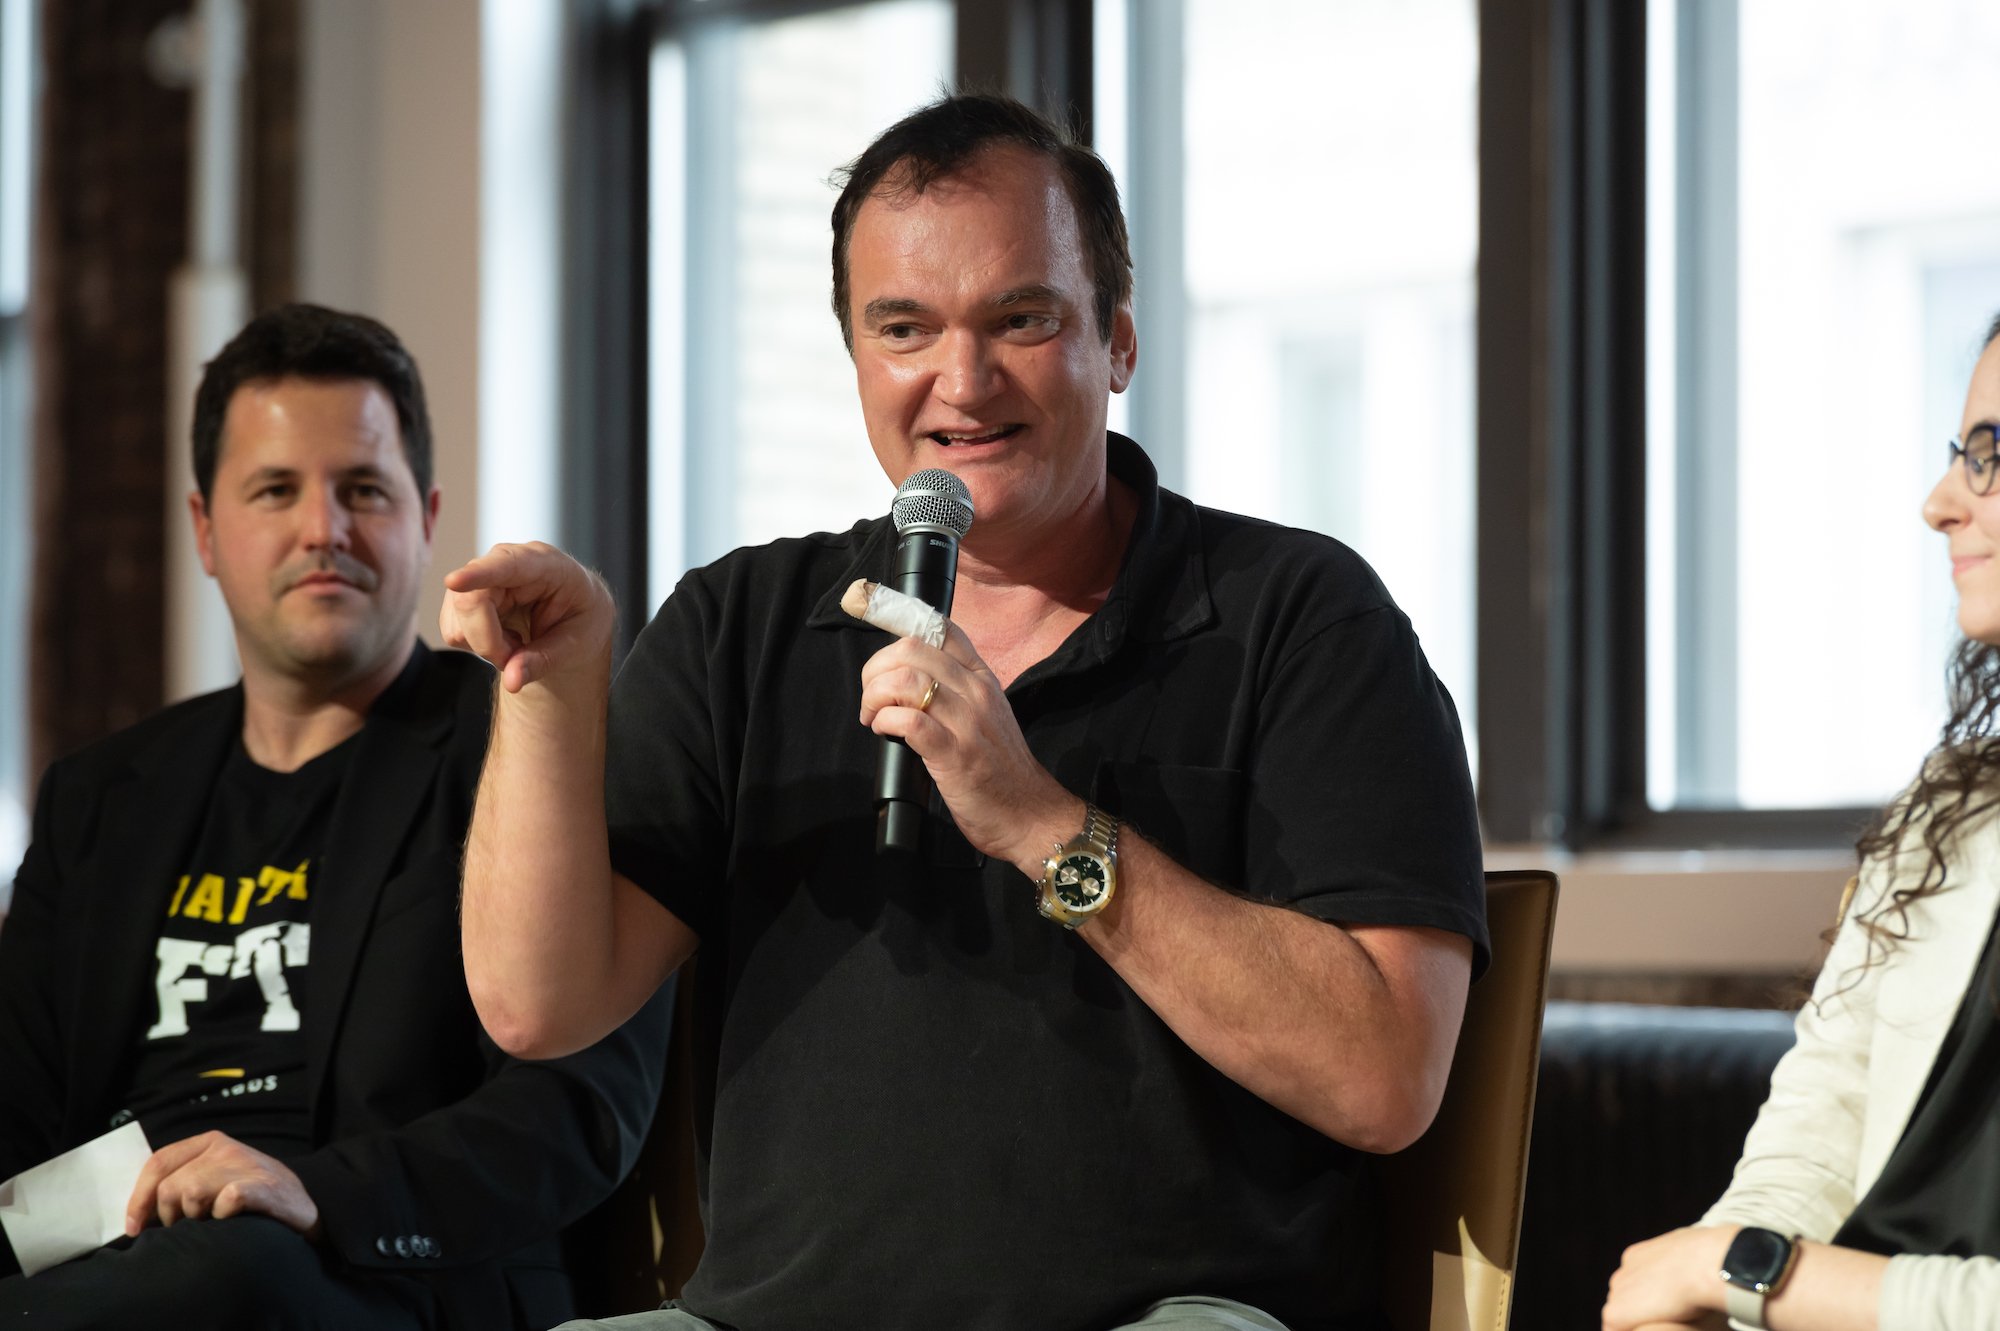 'Super Pumped' narrator Quentin Tarantino speaks and points on a panel